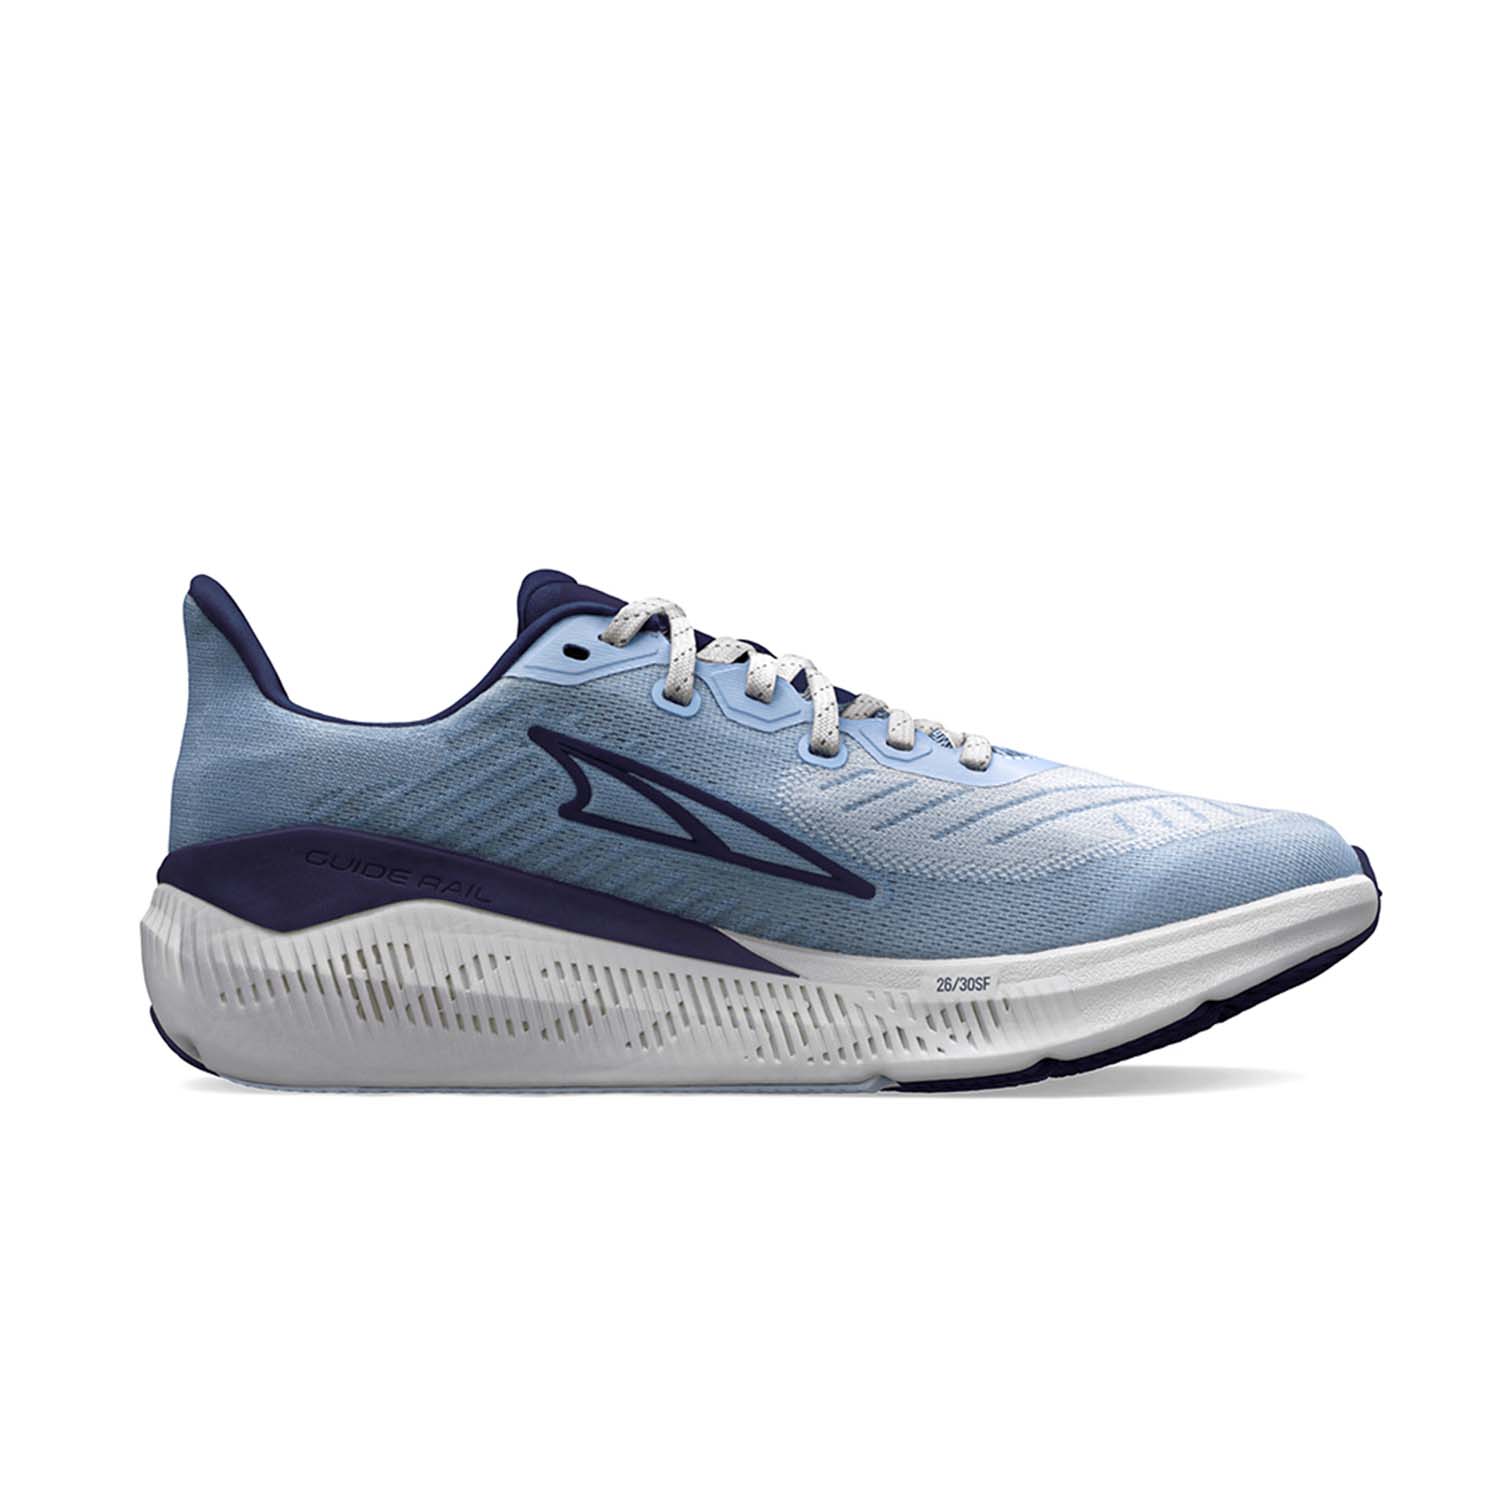 Altra Experience Form - Blue/Gray